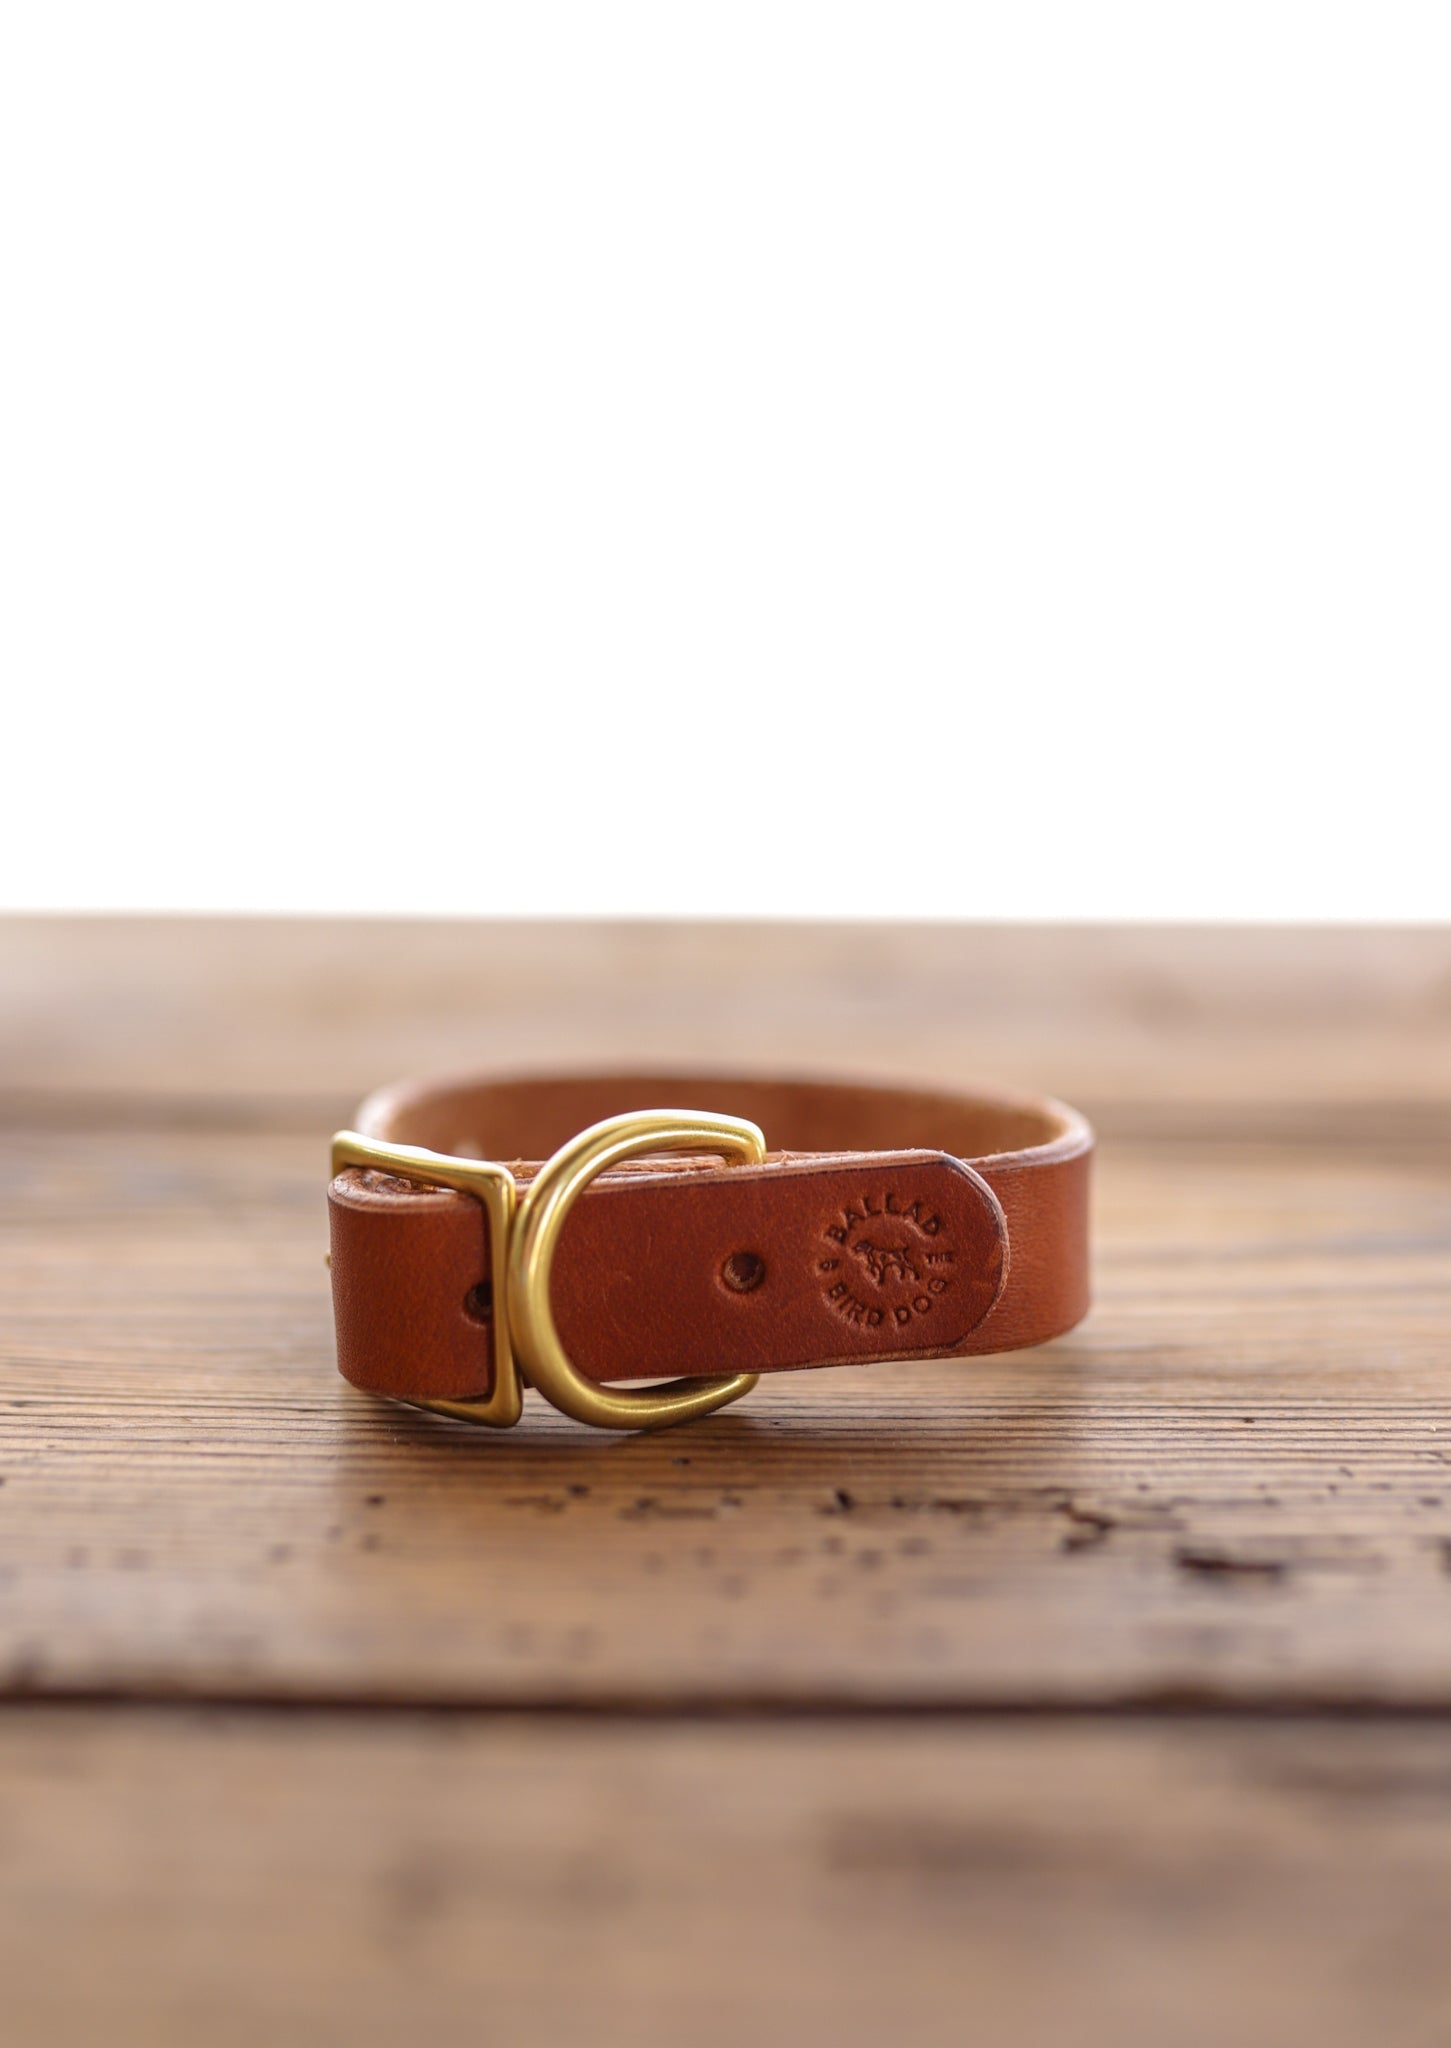 Leather Dog Collar | Ballad Of The Bird - Small Goods Made